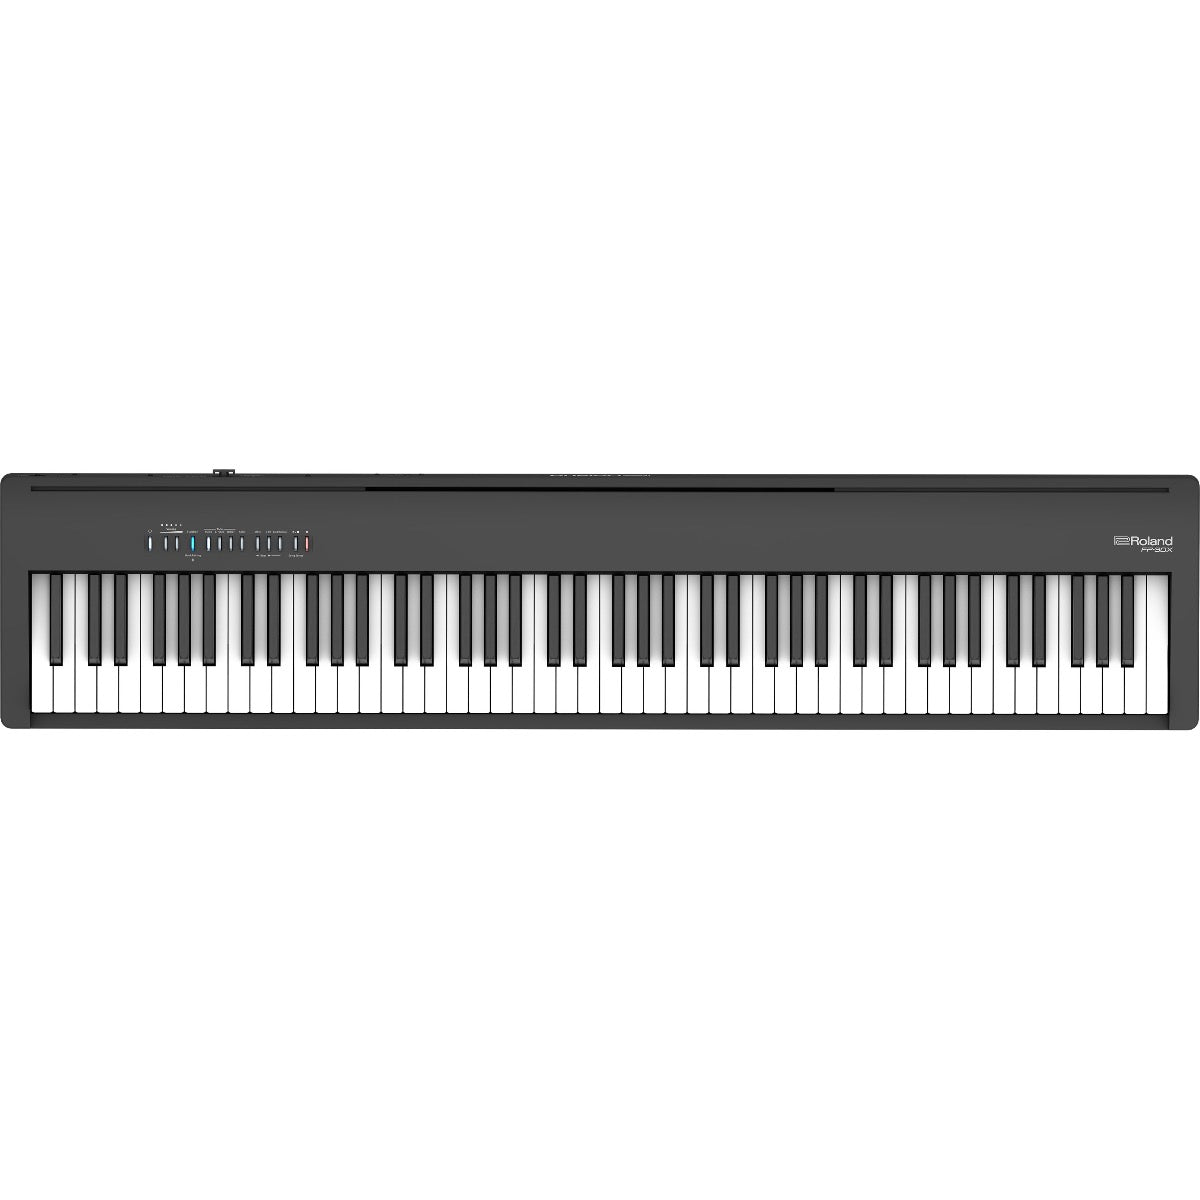 Top view of Roland FP-30X Digital Piano - Black